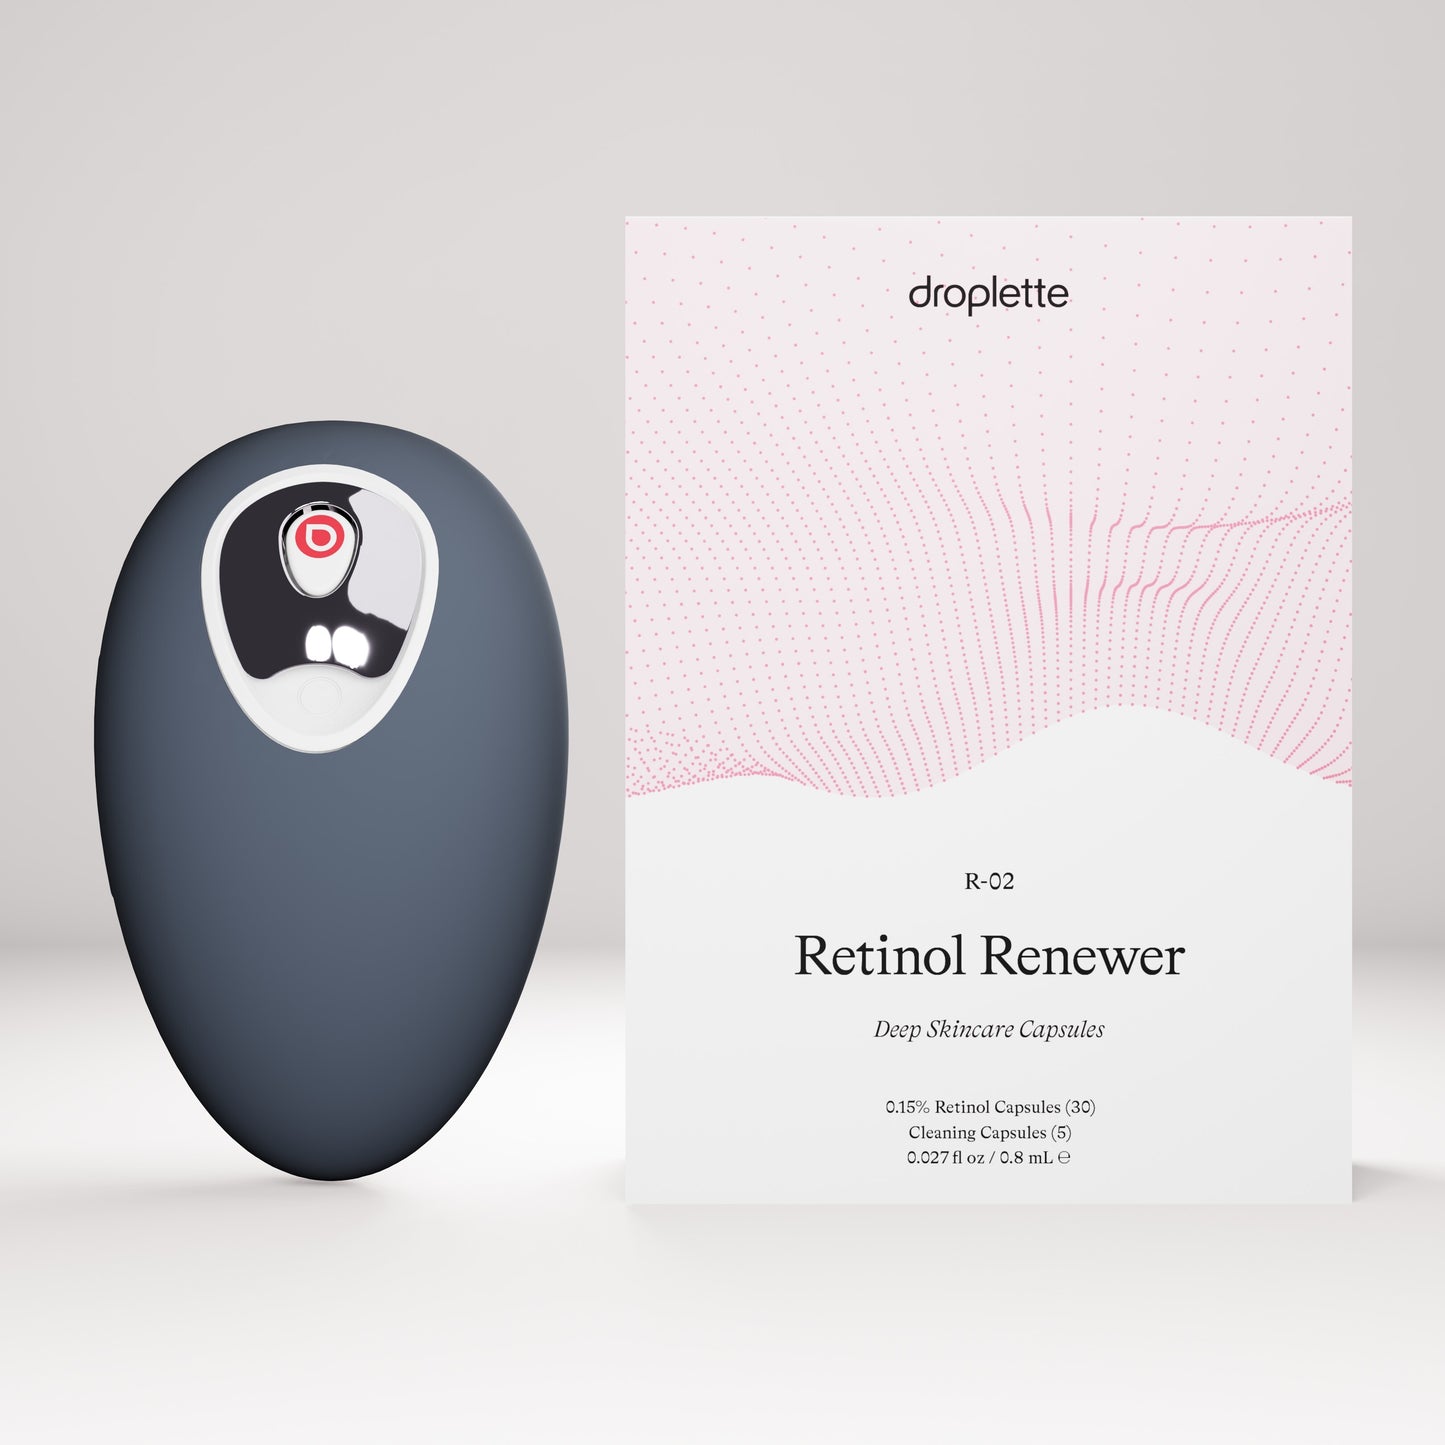 Infinity Grey Droplette Device sits beside a 30 capsule sized box of Droplette's Retinol Renewer capsules